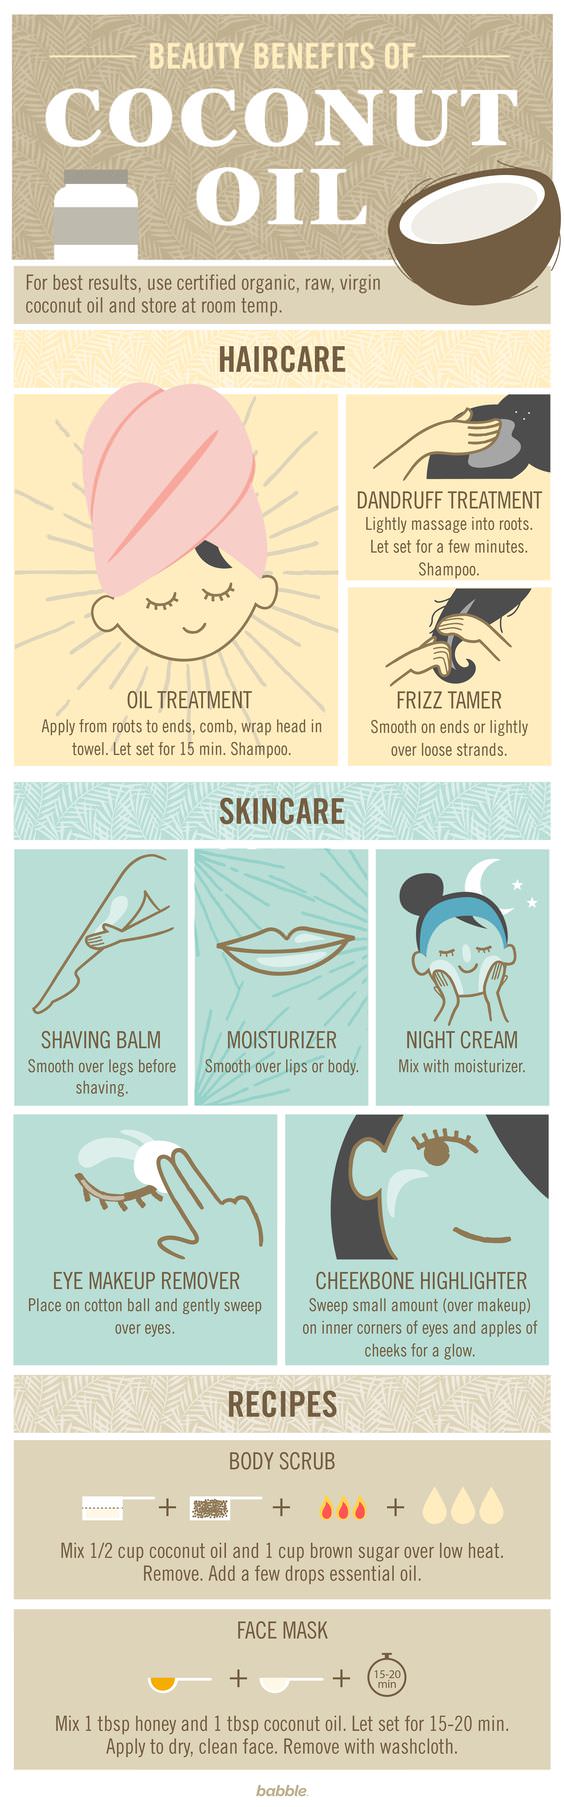 Coconut oil is everywhere right now. You don’t know whether to eat it, drink it, or bathe in it. This guide provides you with all the beauty benefits.